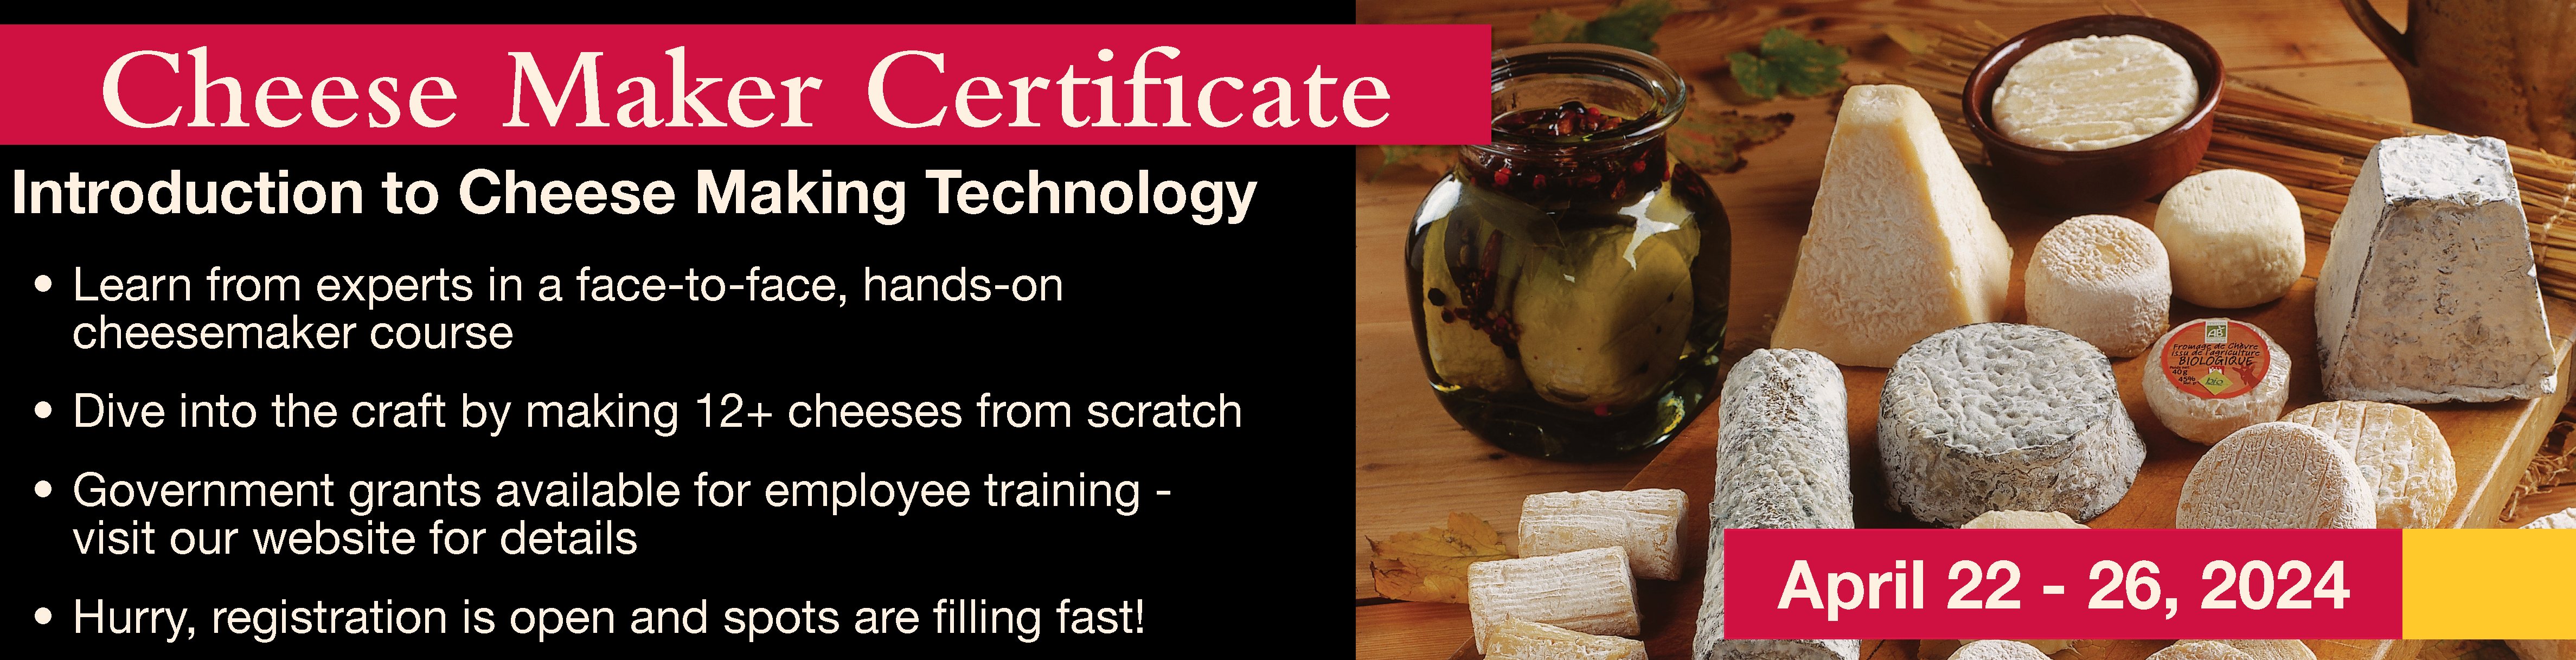 Cheesemaker Course: Introduction to Cheese Making Technology, April 22-26